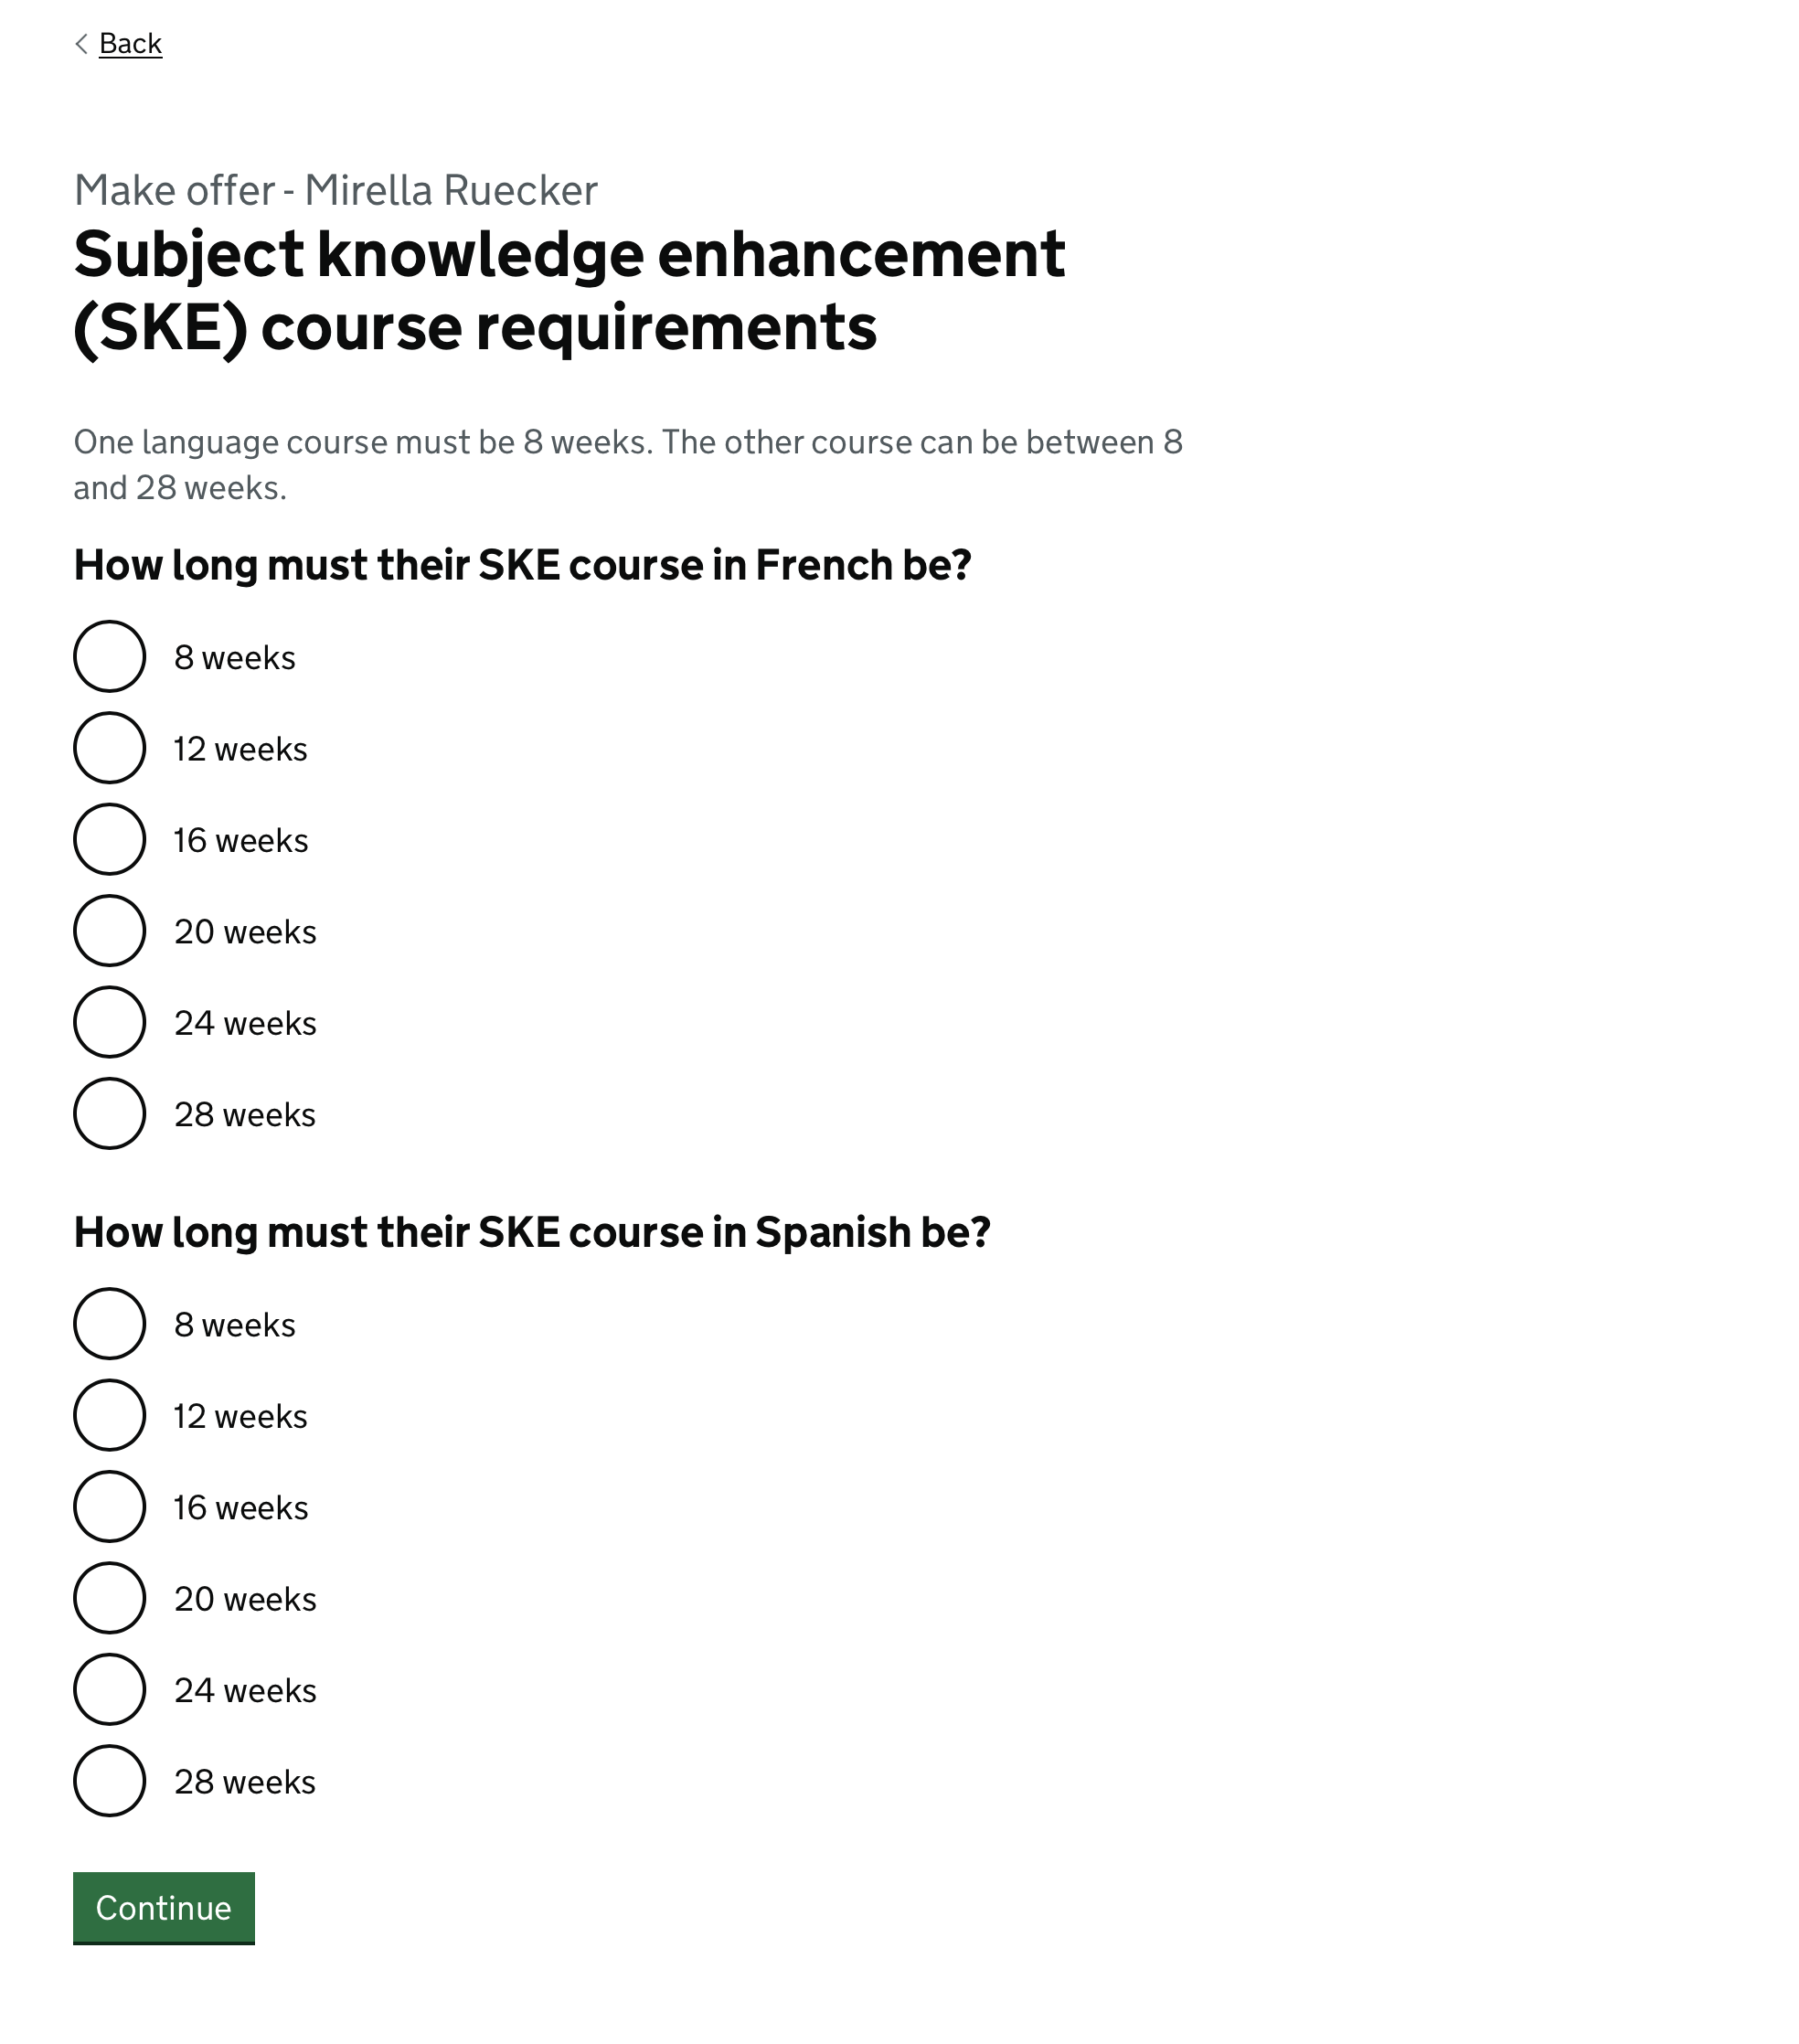 Screenshot with the heading ‘Subject knowledge enhancement (SKE) course requirements’. Beneath this there are two subheadings labelled ‘How long must their French course be?’ and ‘How long must their Spaniish course be?’. Each question has the same 6 answers as radio buttons: 8 weeks, 12 weeks, 16 weeks, 20 weeks, 24 weeks and 28 weeks.